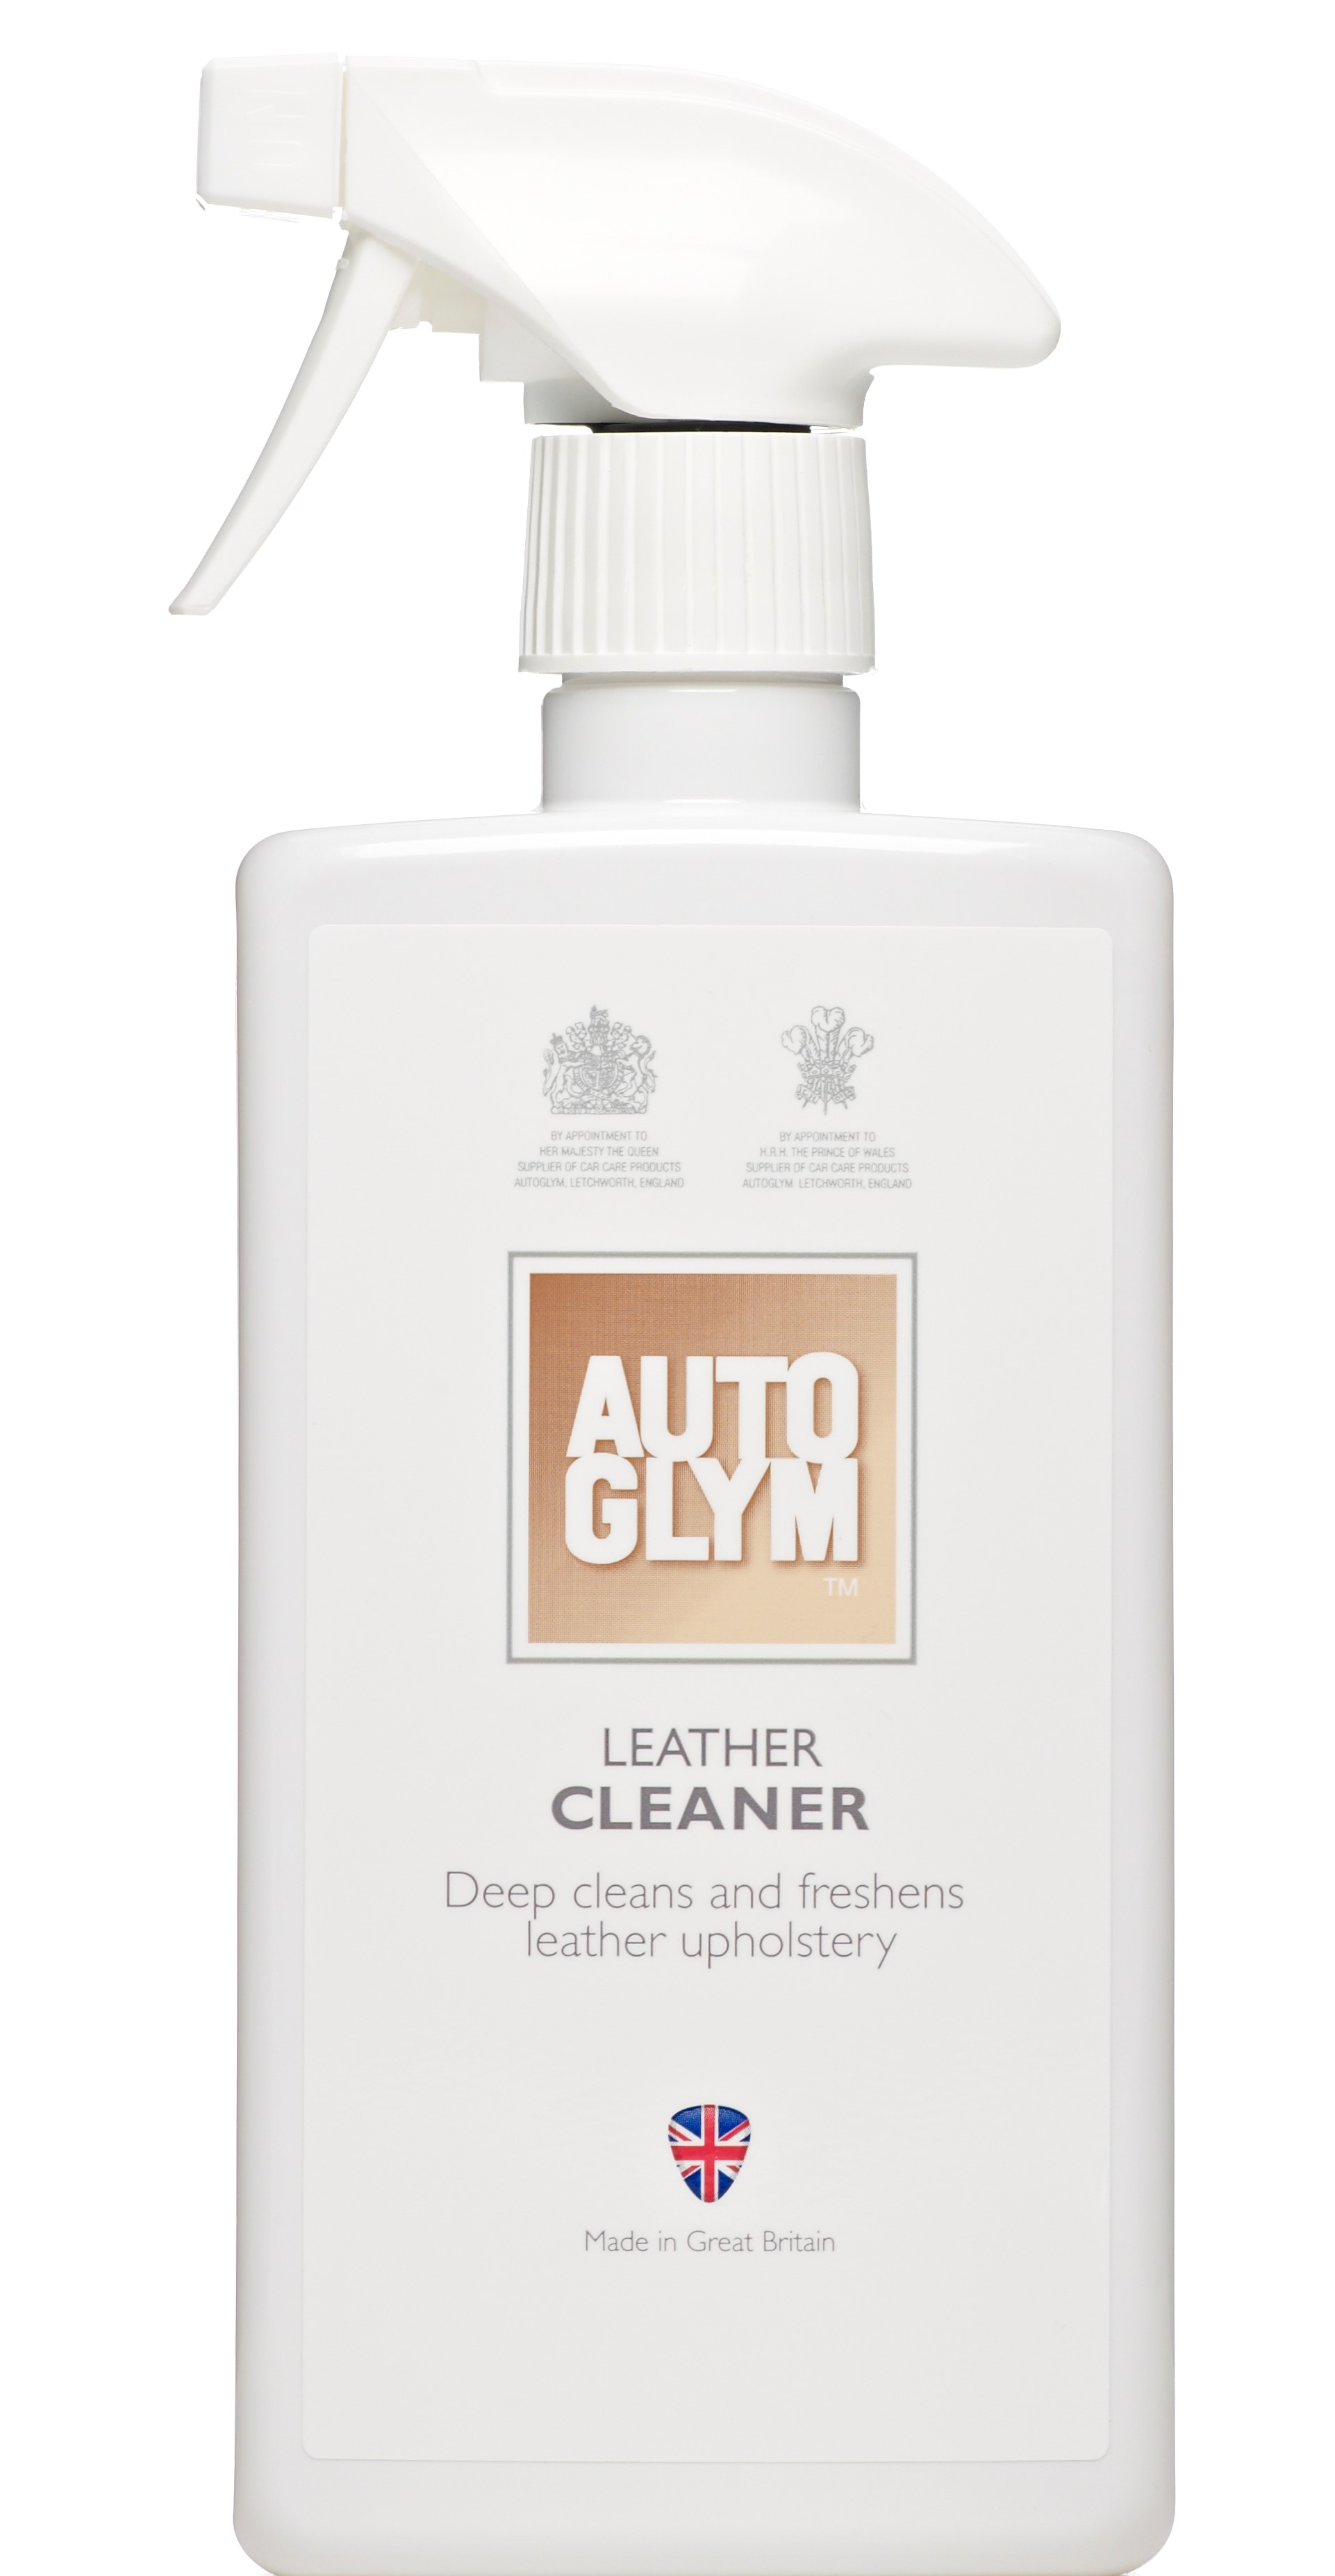 AUTOGGLYM LEATHER CLEANER 